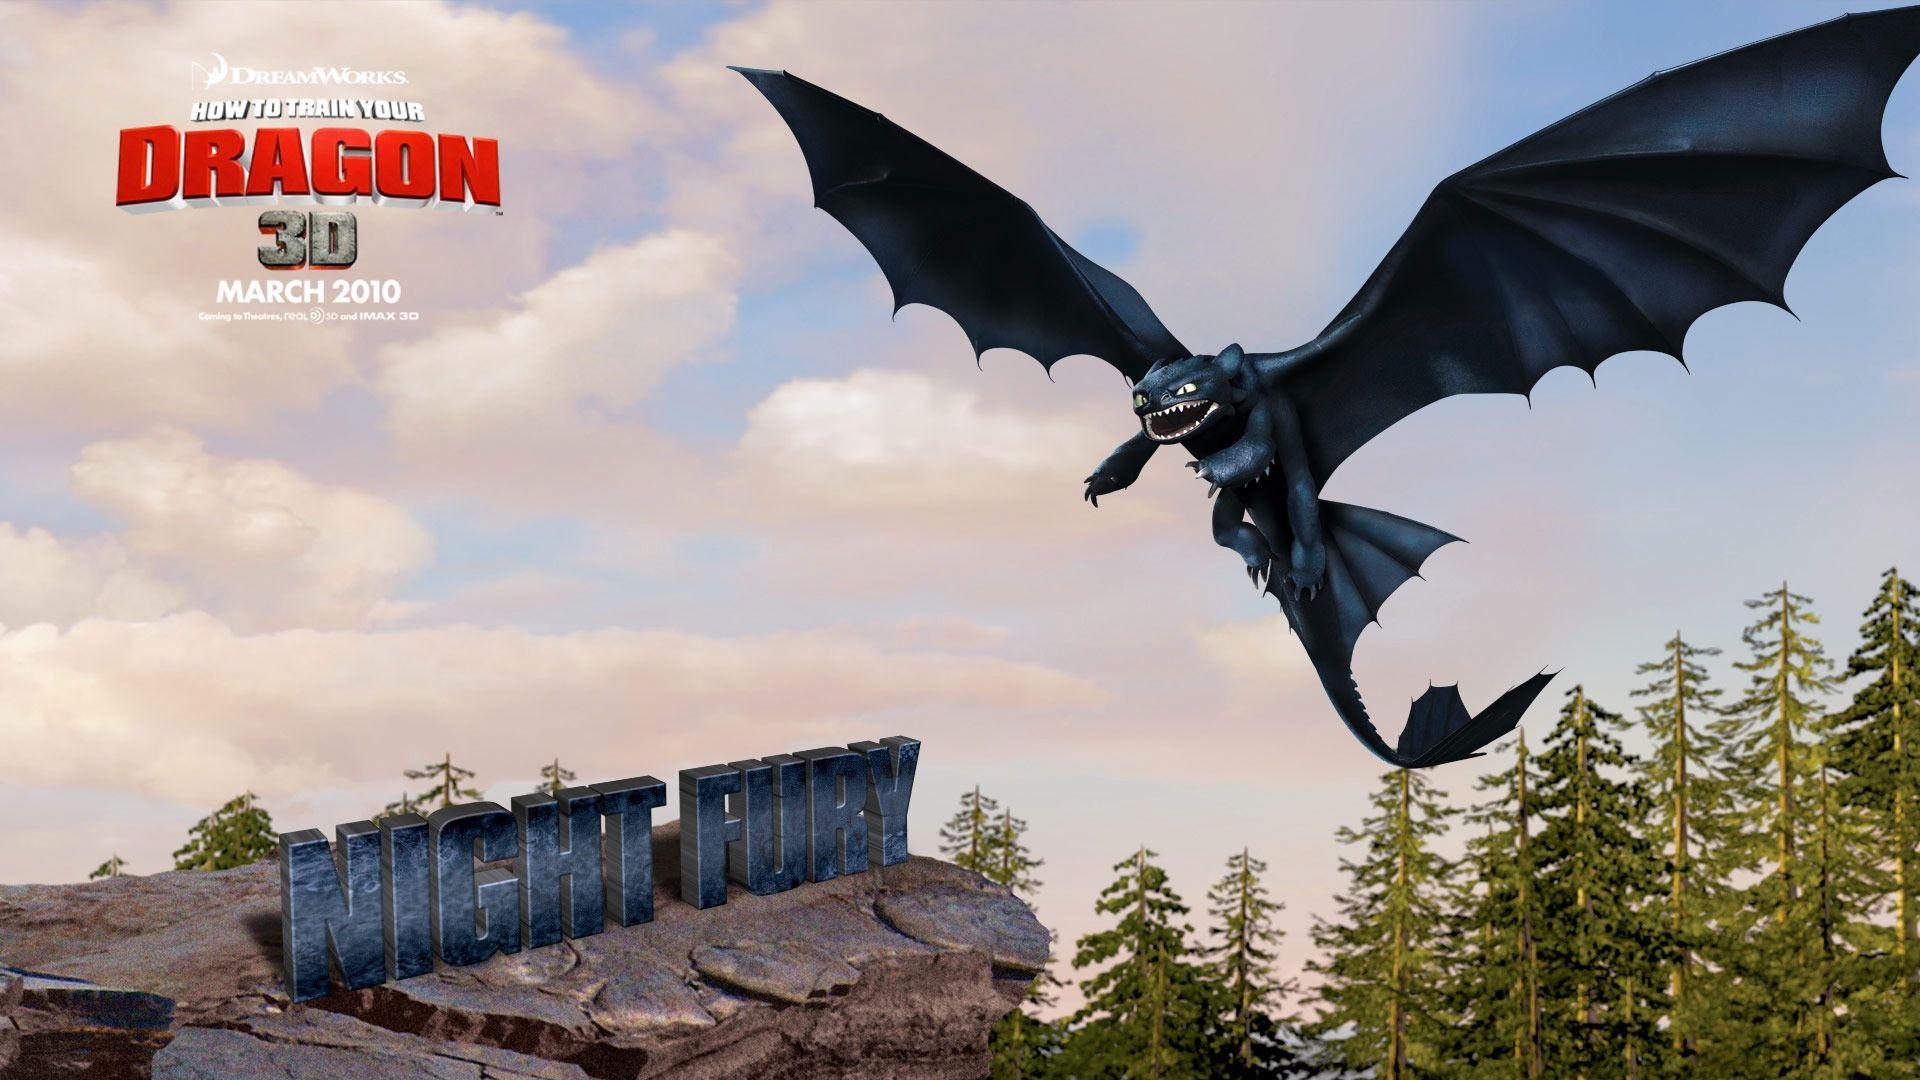 Download wallpaper 1920x1080 how to train your dragon, toothless